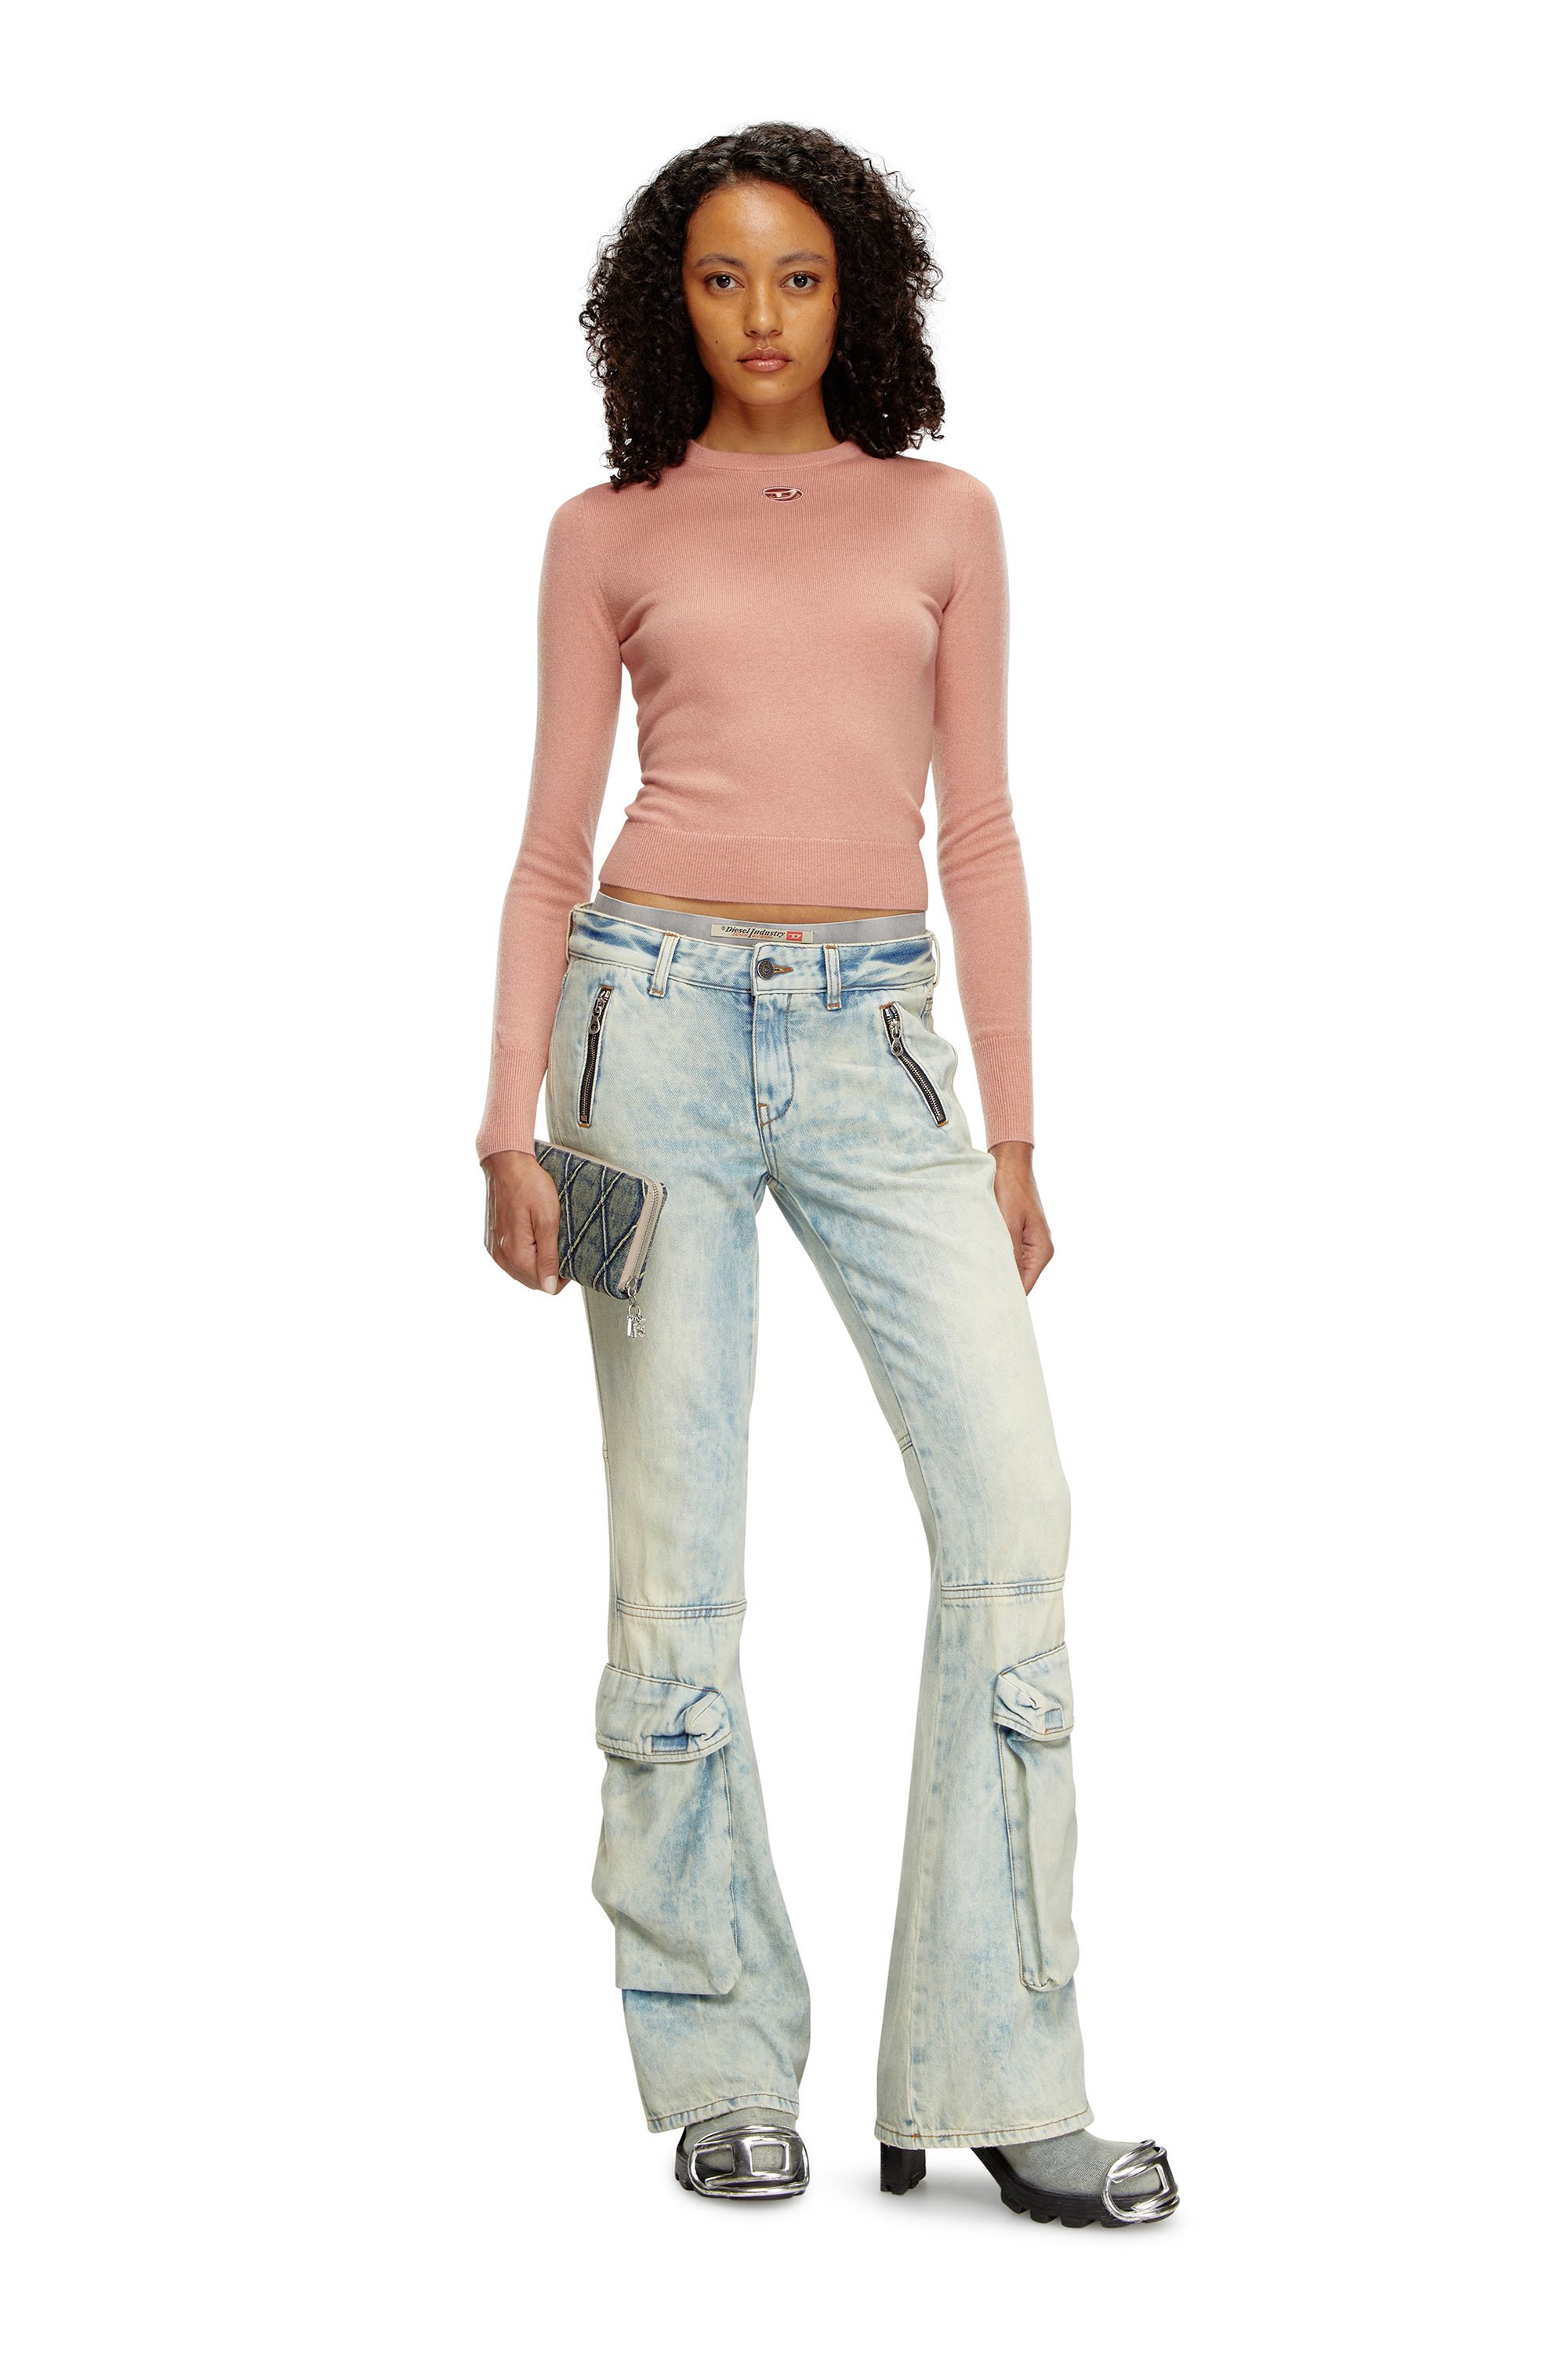 Diesel - M-AREESAX, Donna Top in lana e cashmere in Rosa - Image 2